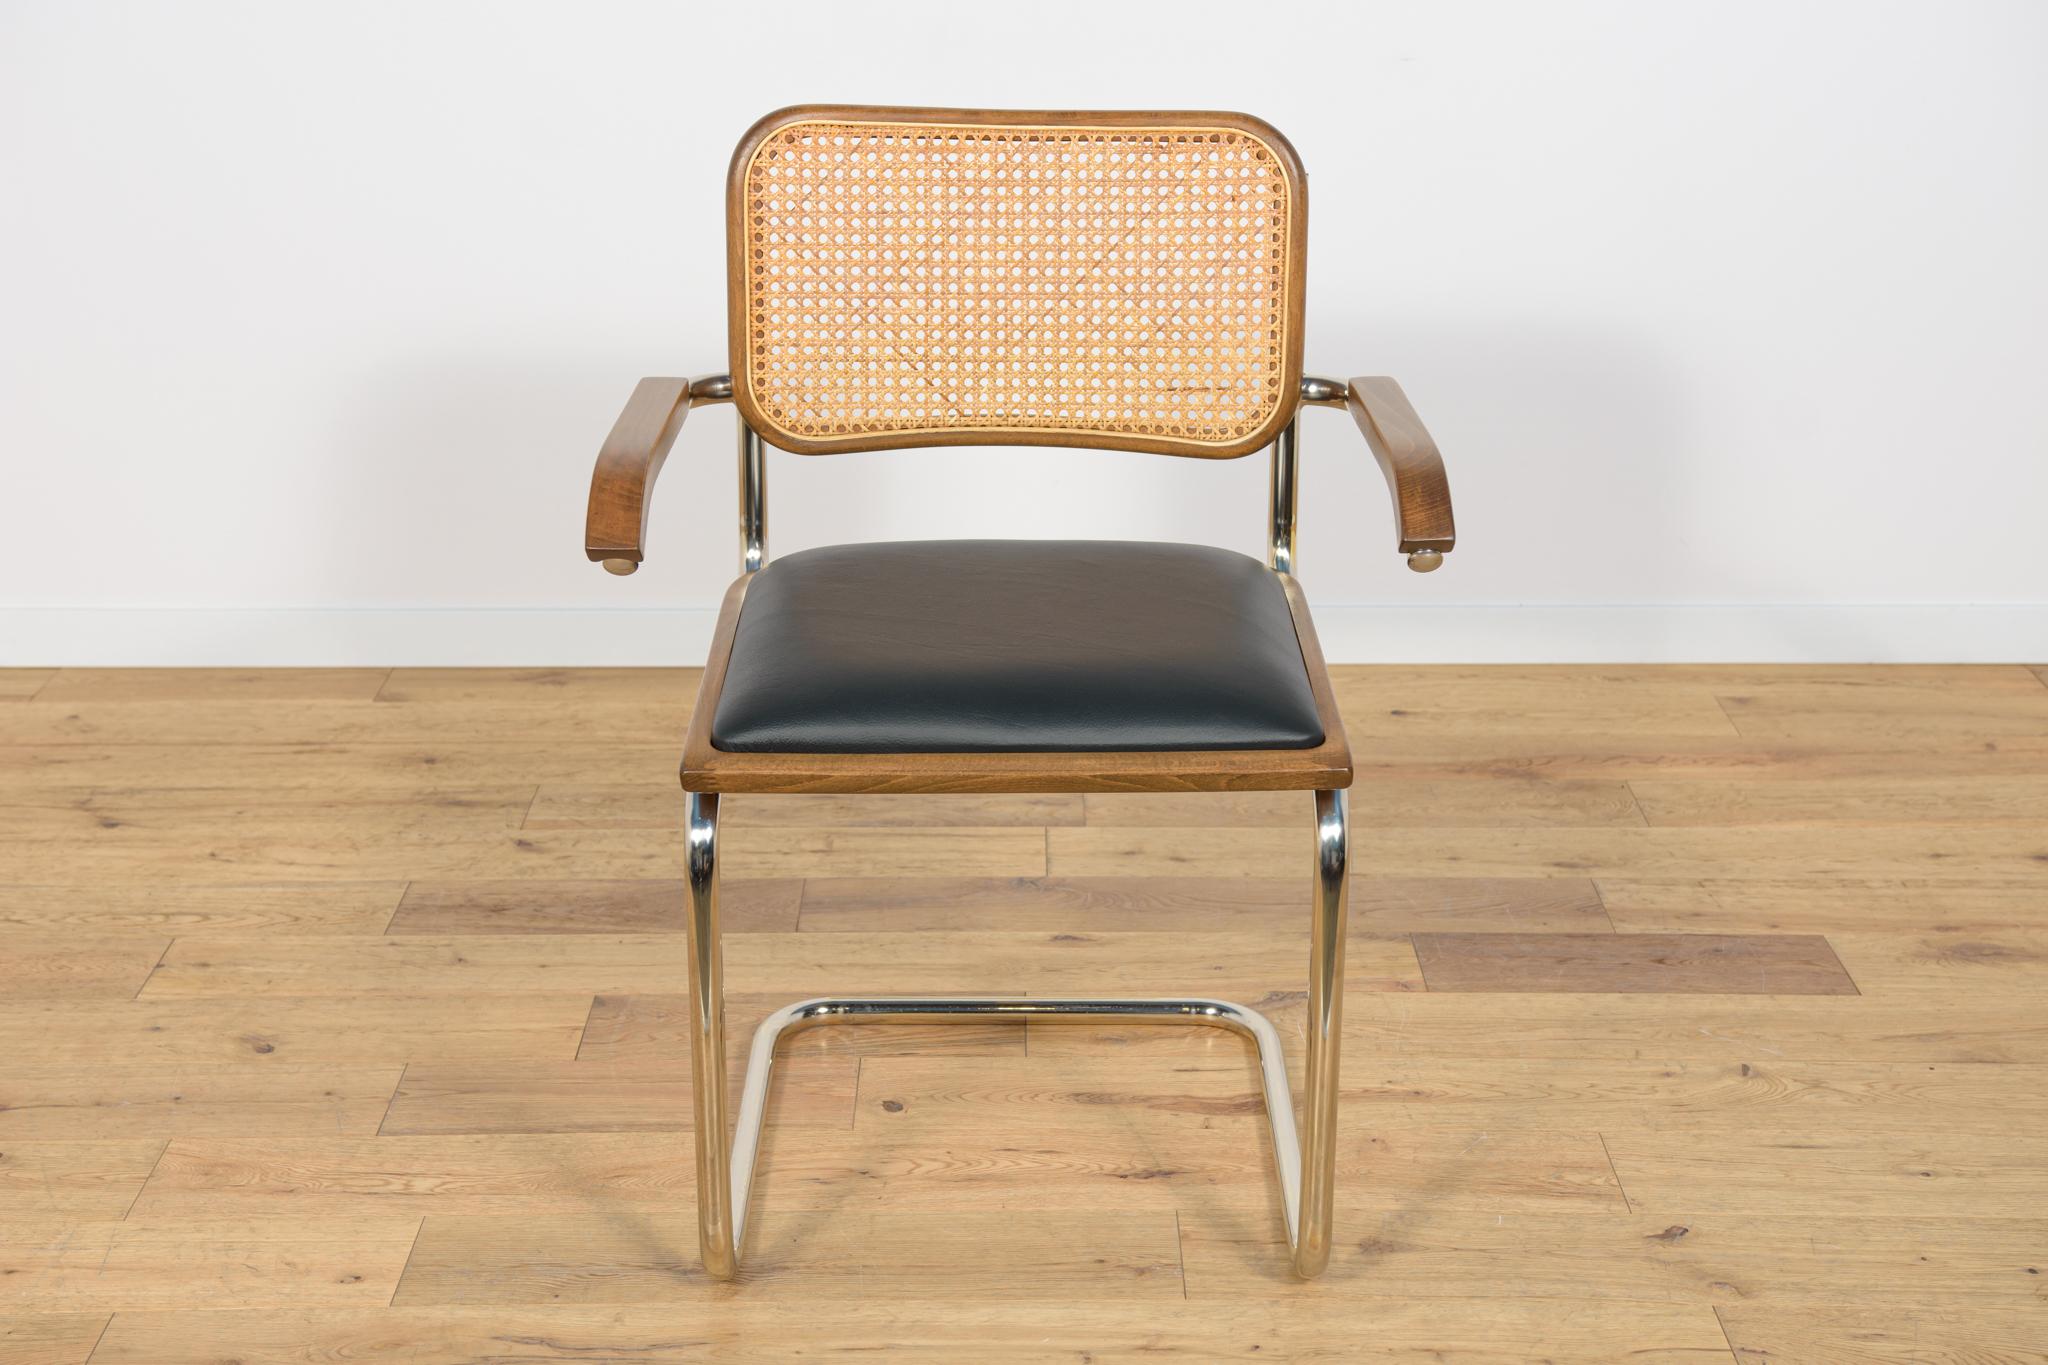 Cesca-type armchair, modeled on Marcel Breuer's design from 1928. Produced in the 1980s. The chrome-plated frame is in very good original condition, has been cleaned and polished. The joinery has been professionally renovated, the beech wood has